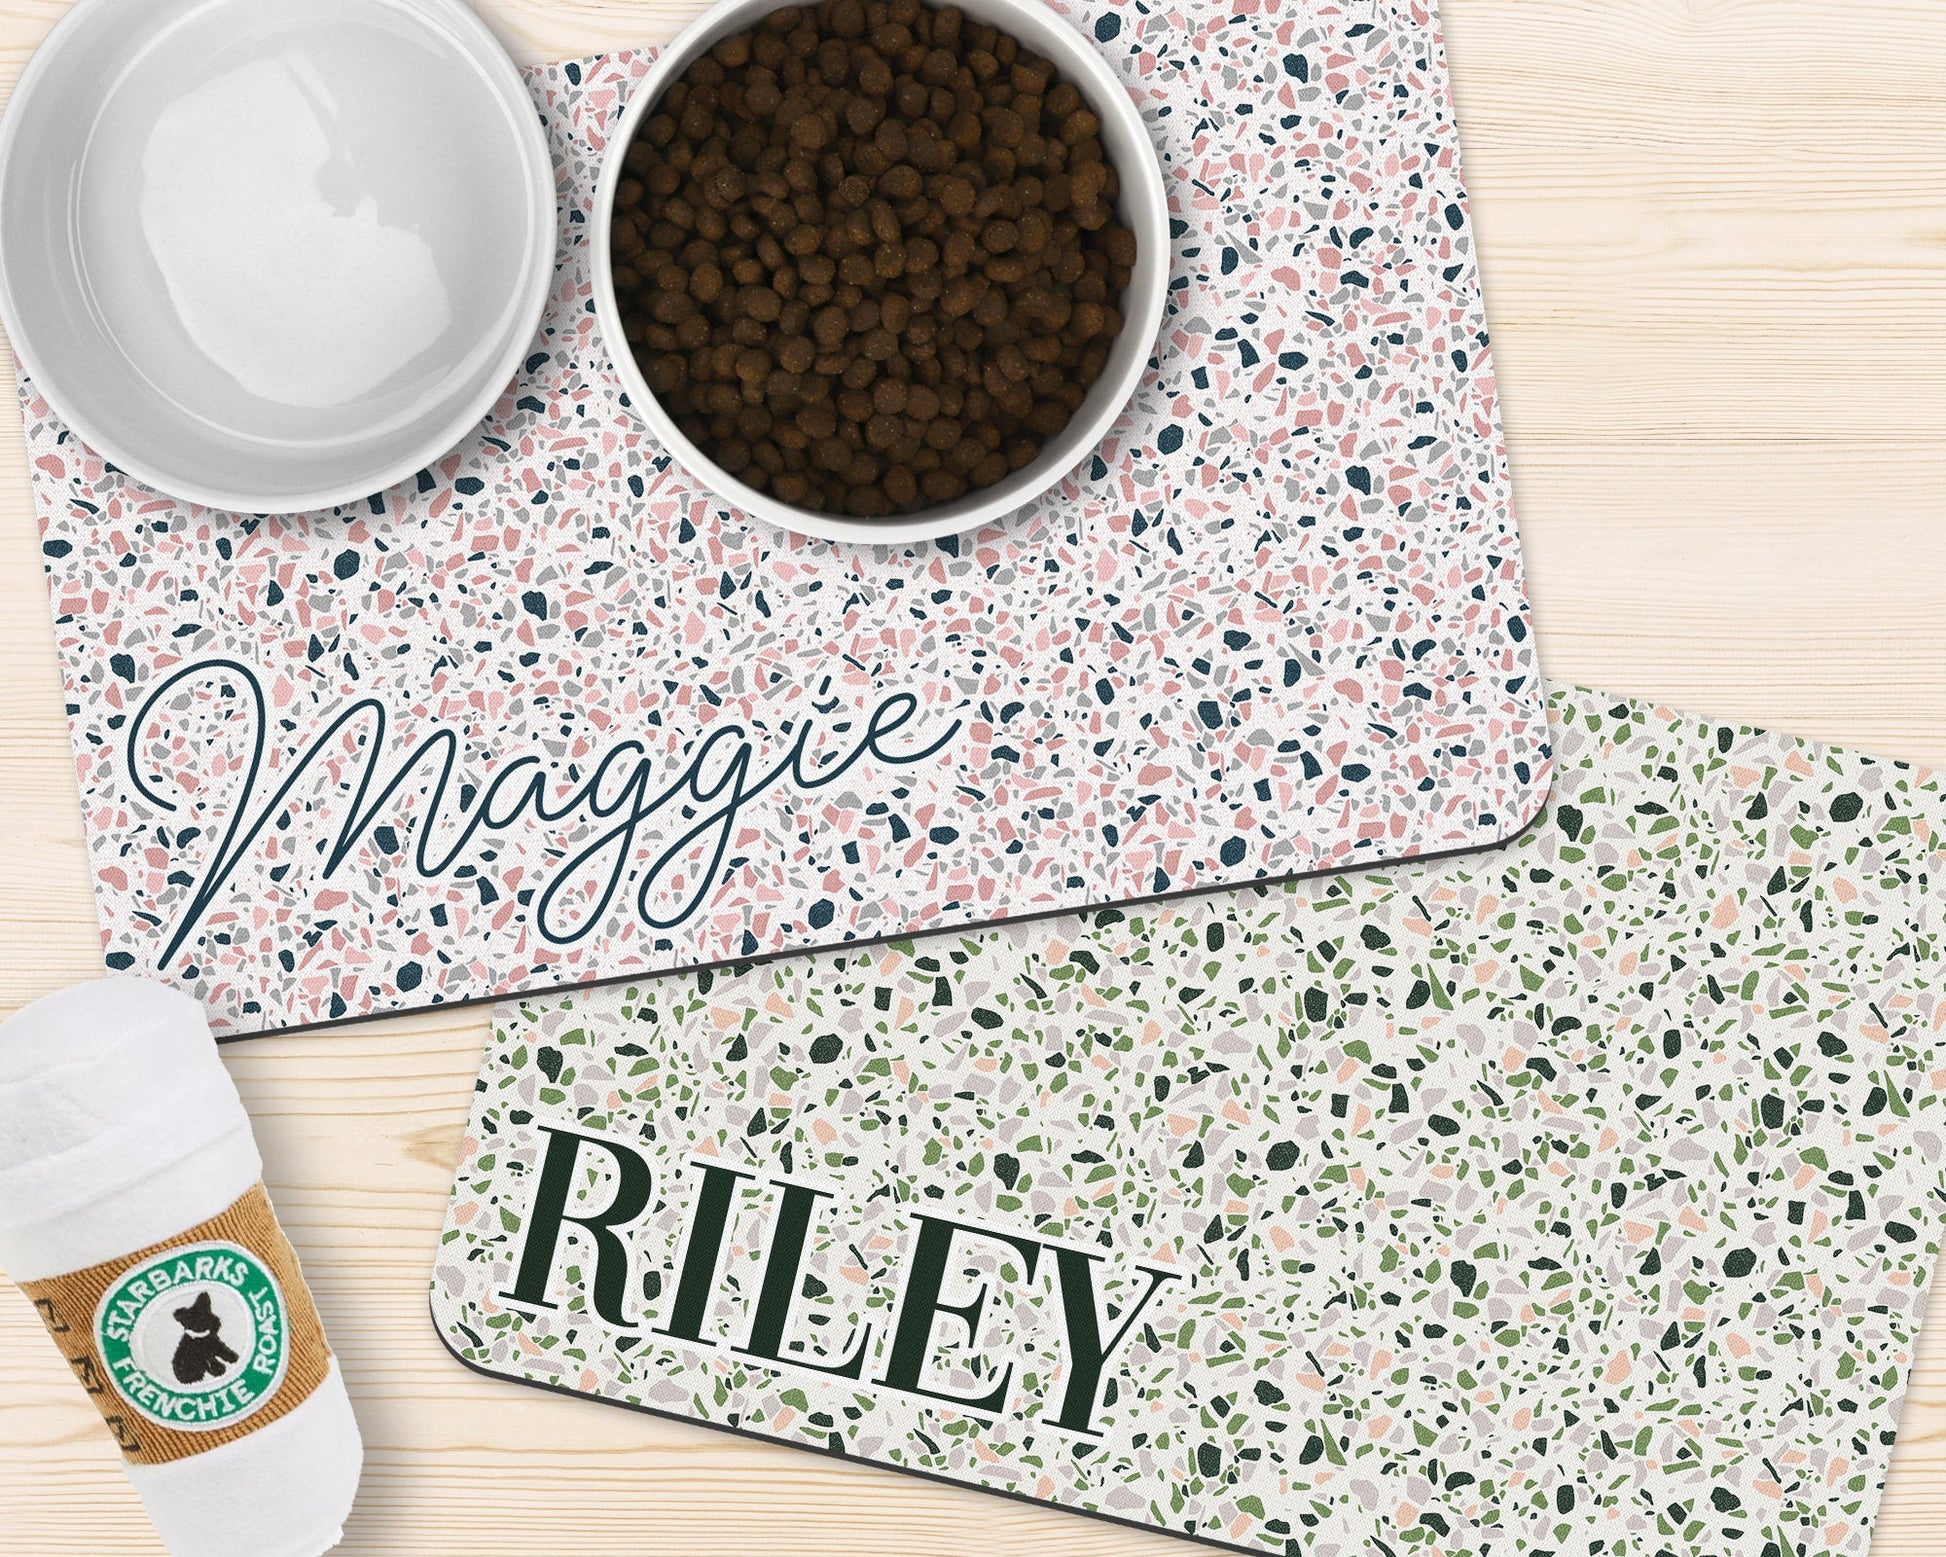 Boho Chic Terrazzo Pet Bowl Mats for Dogs and Cats Nonslip Bowl Mat Customized with Name Two Sizes Eclectic Modern Decor - Squishy Cheeks